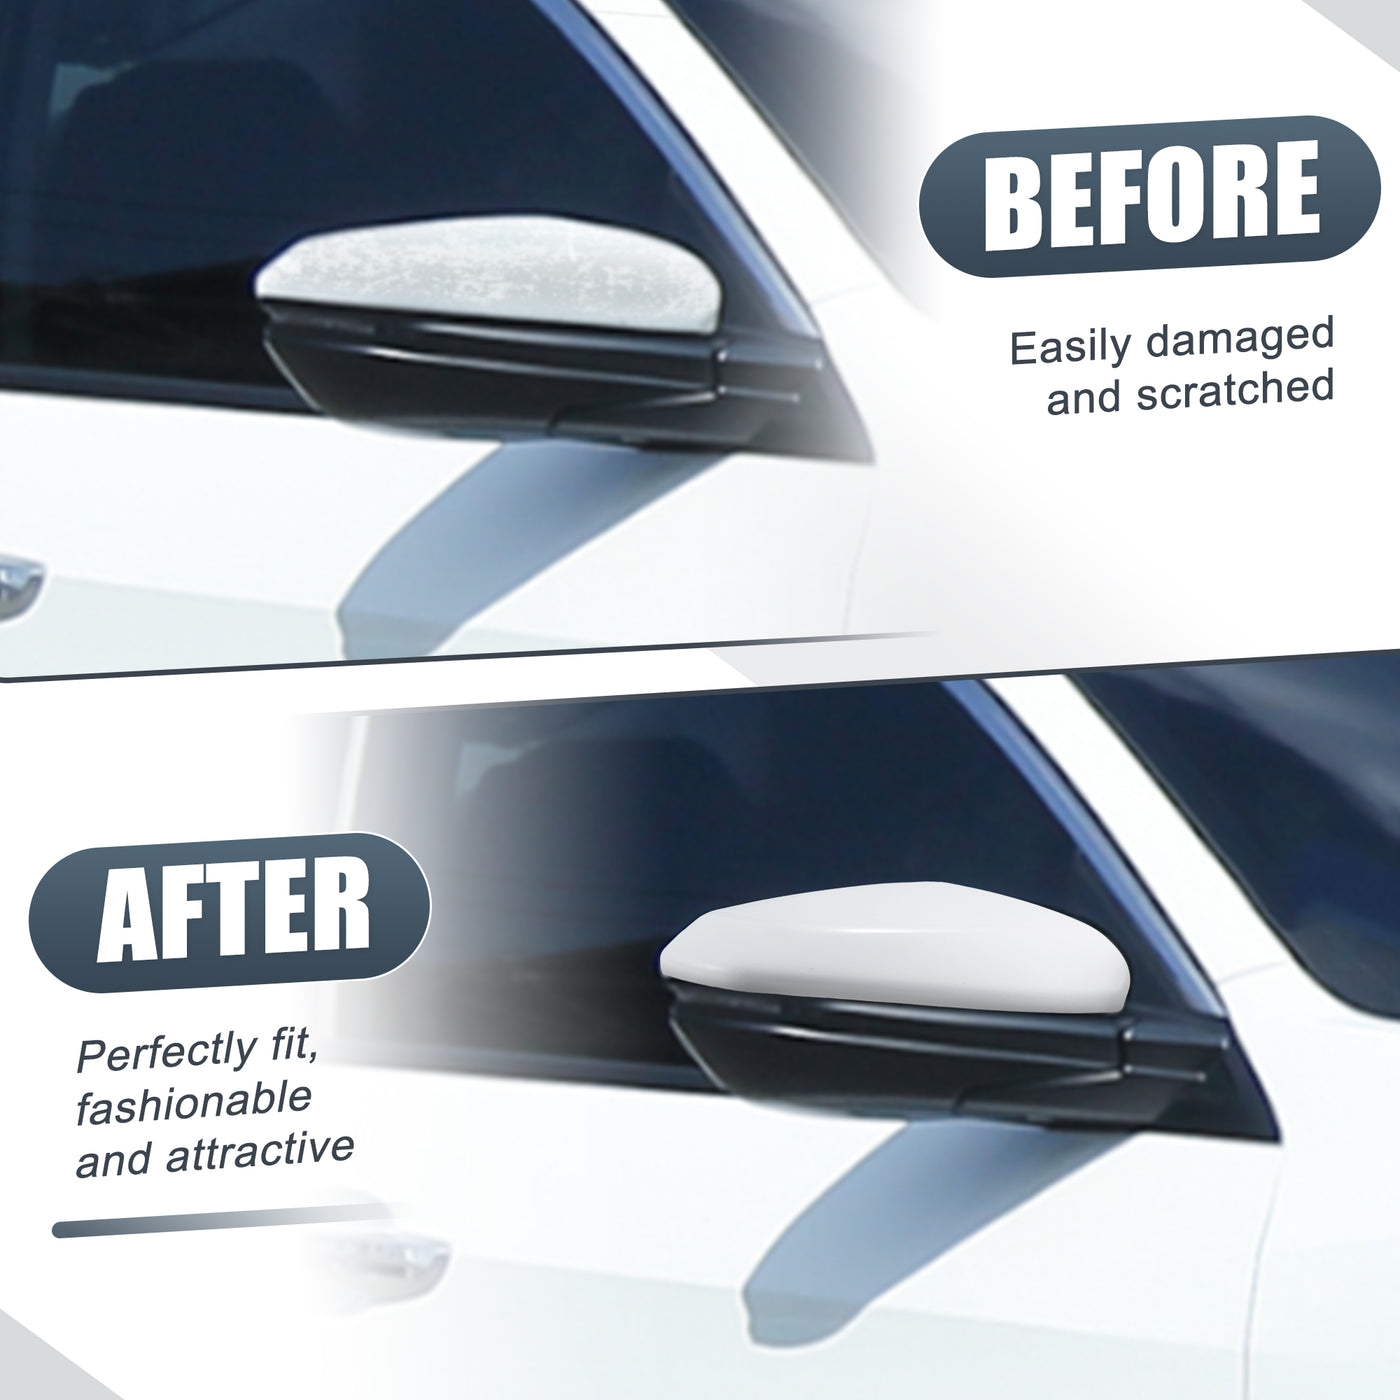 X AUTOHAUX Car Rear View Right Passenger Side Mirror Cover Cap Replacement White for Honda CIVIC 2016-2021 Mirror Guard Covers Exterior Decoration Trims